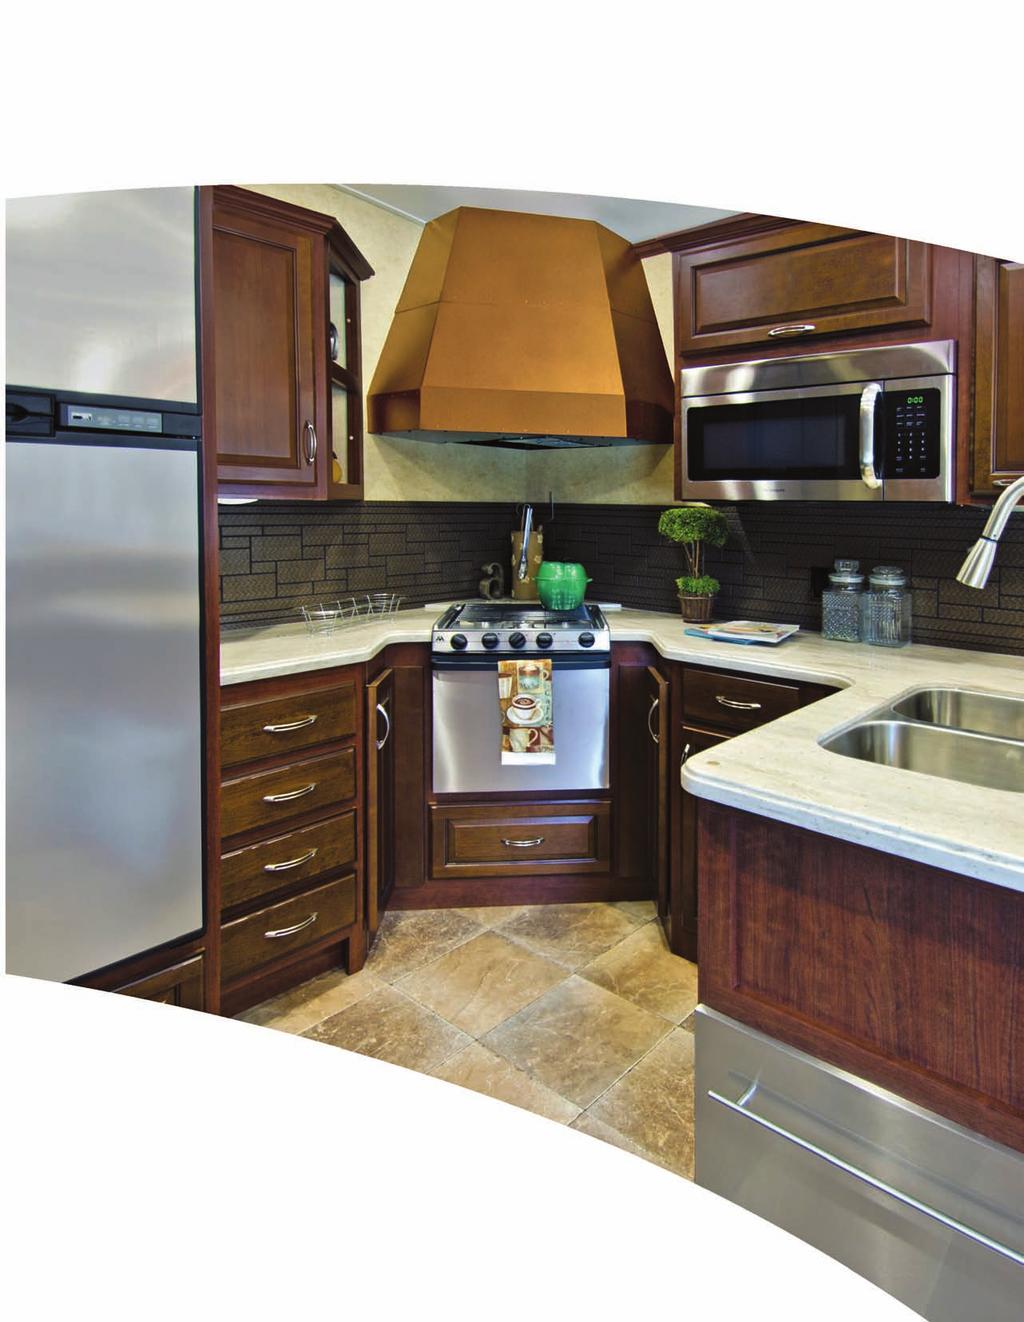 With the double door refrigerator/freezer, microwave and three-burner range with oven